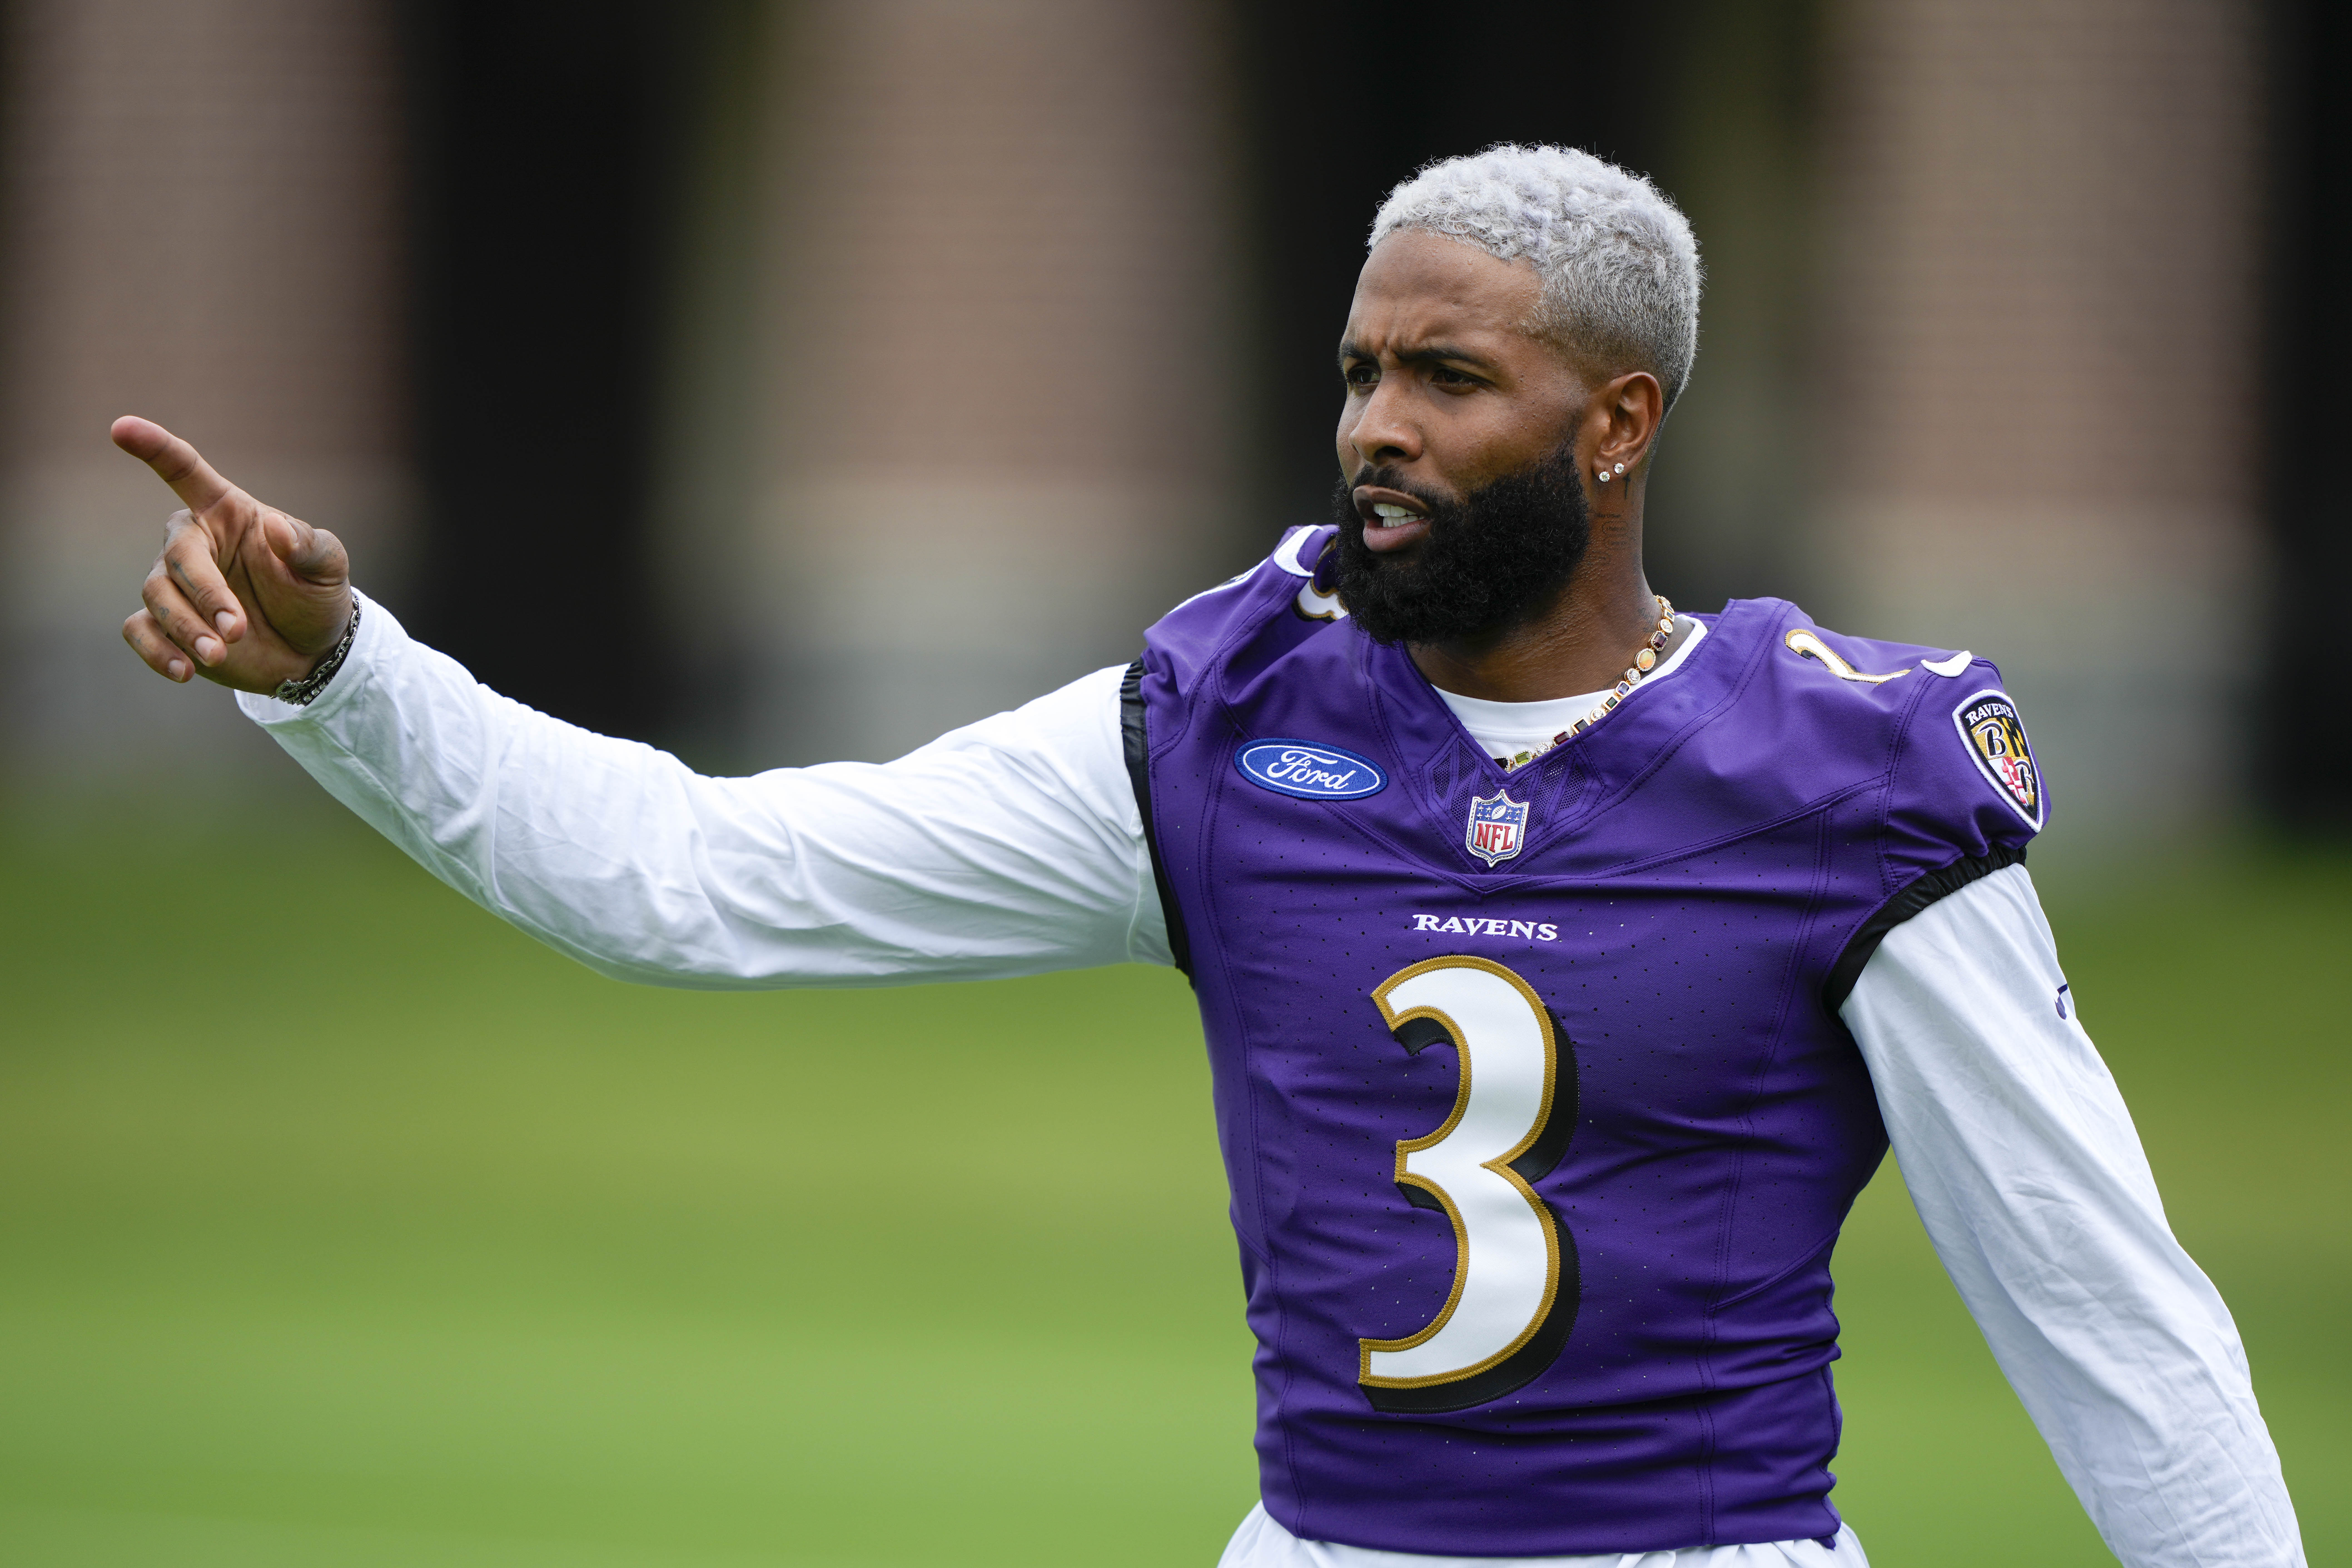 WATCH: Odell Beckham Jr. catches passes pregame in a Ravens Super